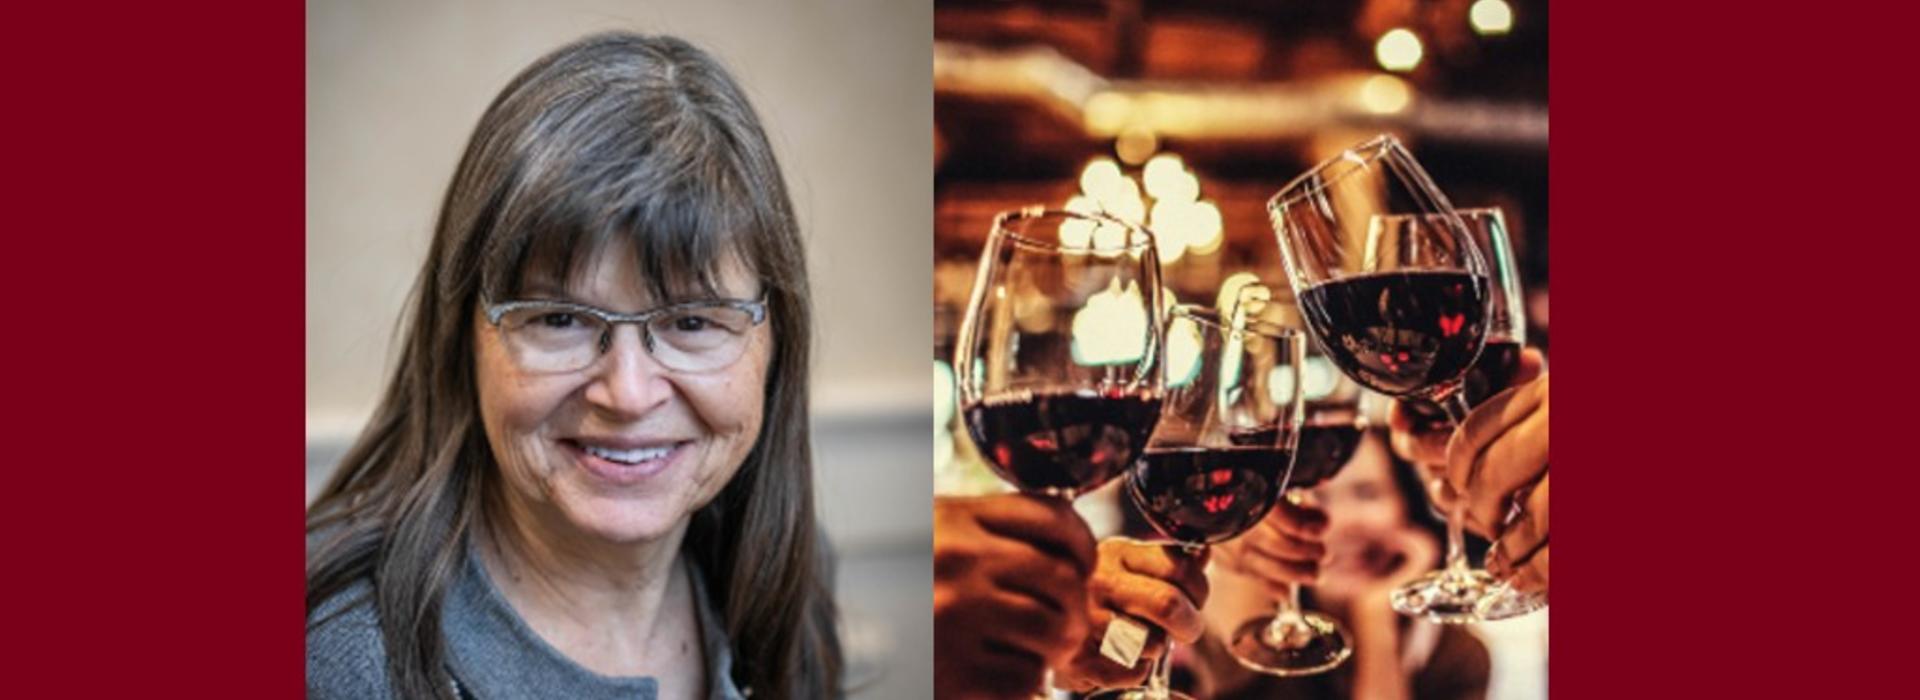 Photo of Sheila Specker next to image of people with wine glasses. 